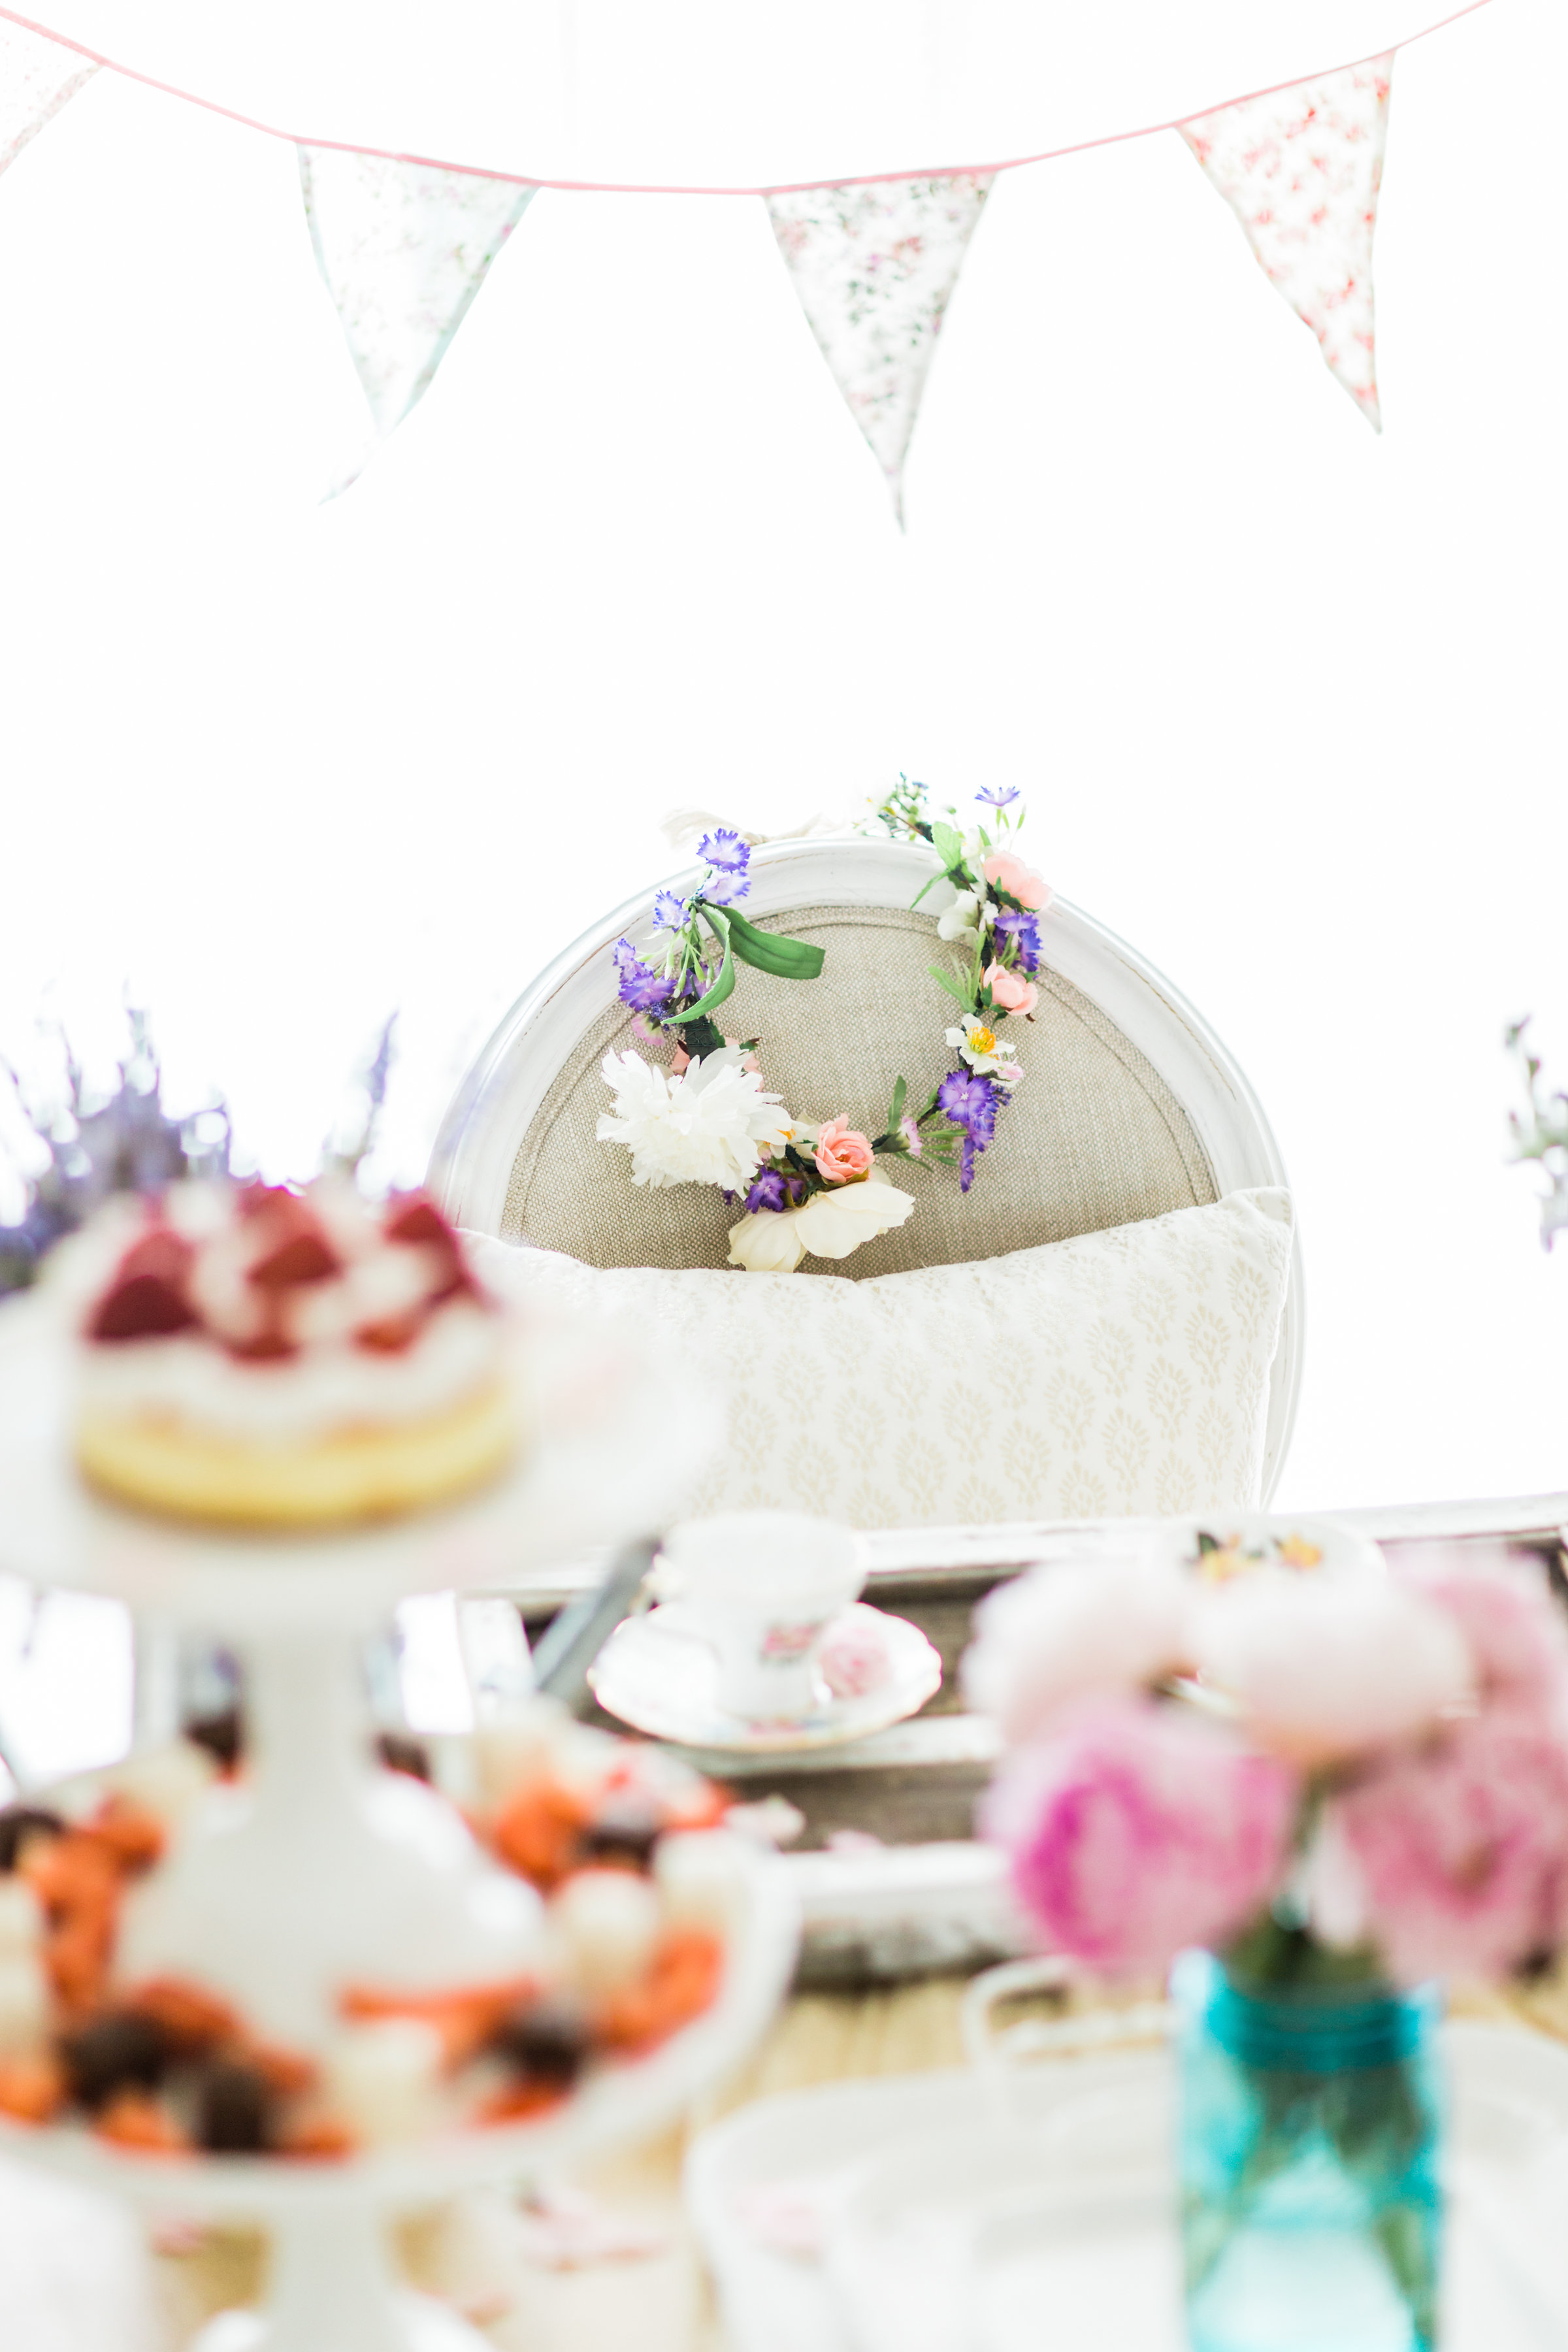 Lifestyle blogger Lexi of Glitter, Inc. shares how to throw a tea party baby shower in 6 easy steps; plus a DIY diaper cake using cupcake liners! #babyshower #teaparty #teapartybabyshower #shower #teapartyshower #party #newbaby #baby | Click through for the details. | glitterinc.com | @glitterinc